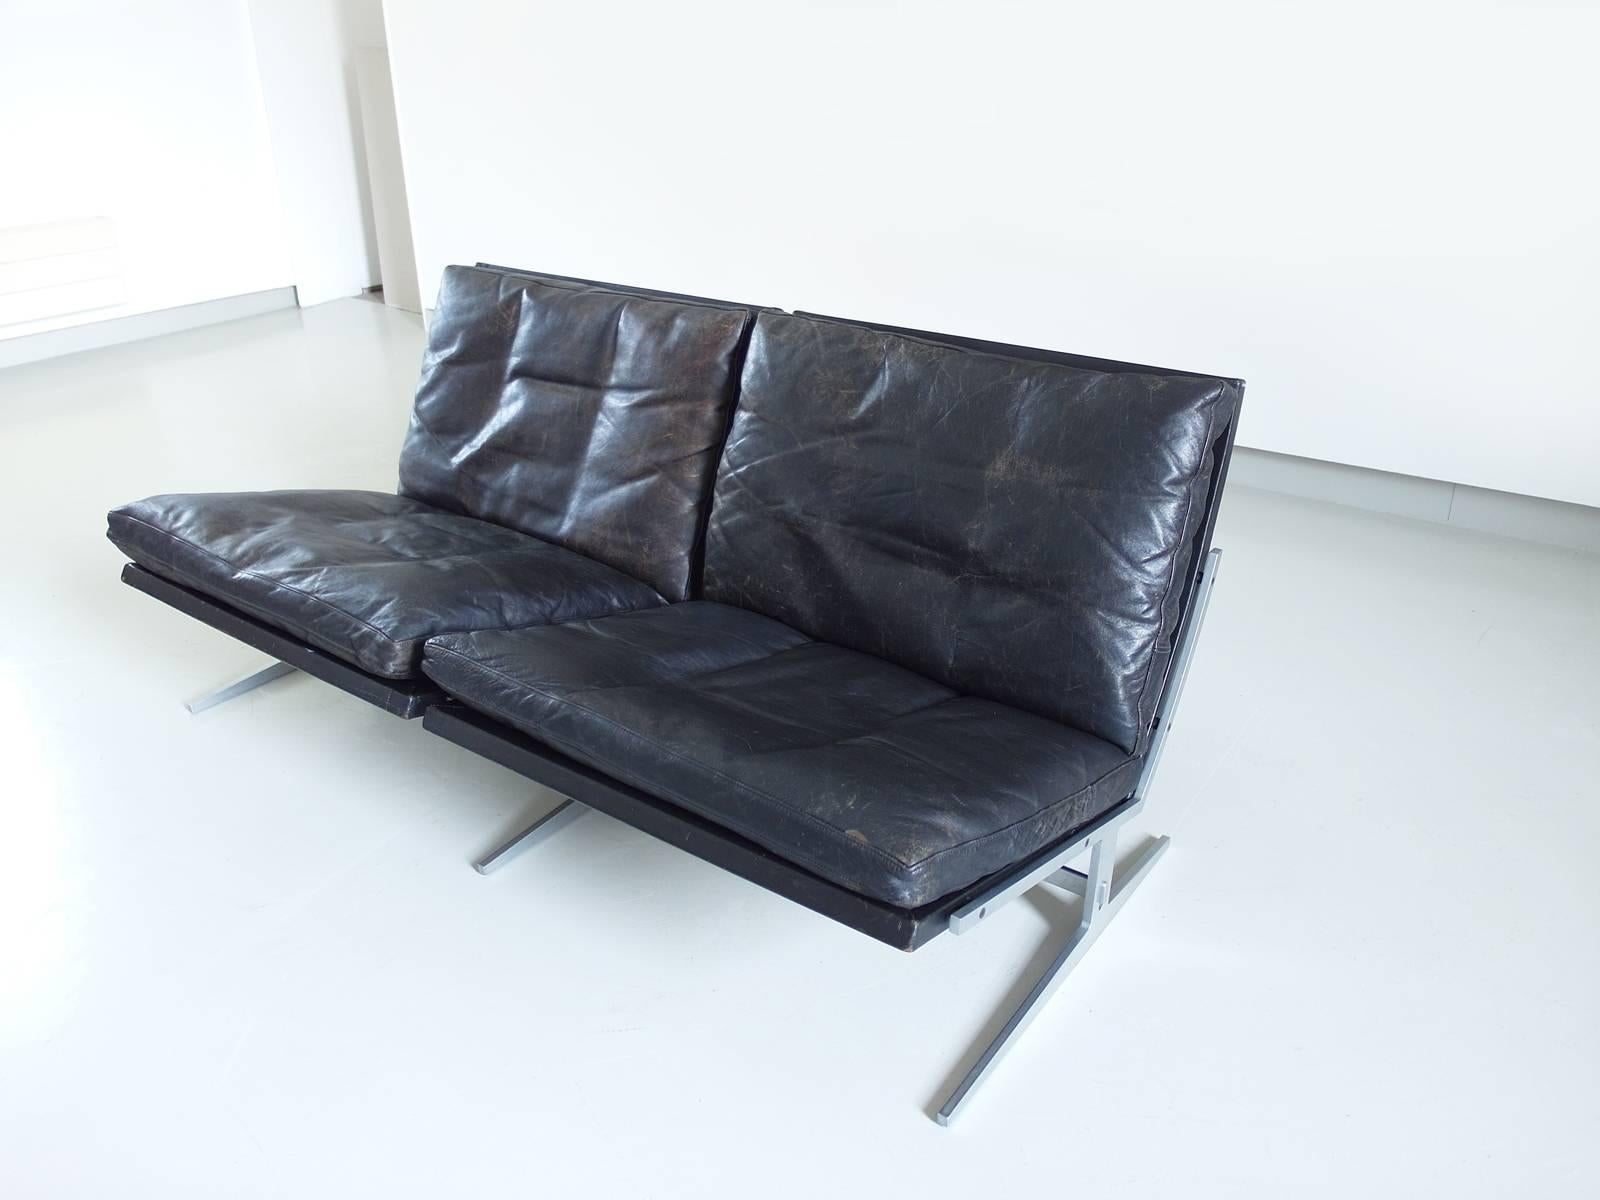 High quality two-seat sofa model BO562 in brushed steel and black leather, designed by Preben Fabricius and Jørgen Kastholm, manufactured by Bo-Ex, Denmark, 1962. 

Designed in 1962, this BO562 lounge chair remains an extraordinary modern and